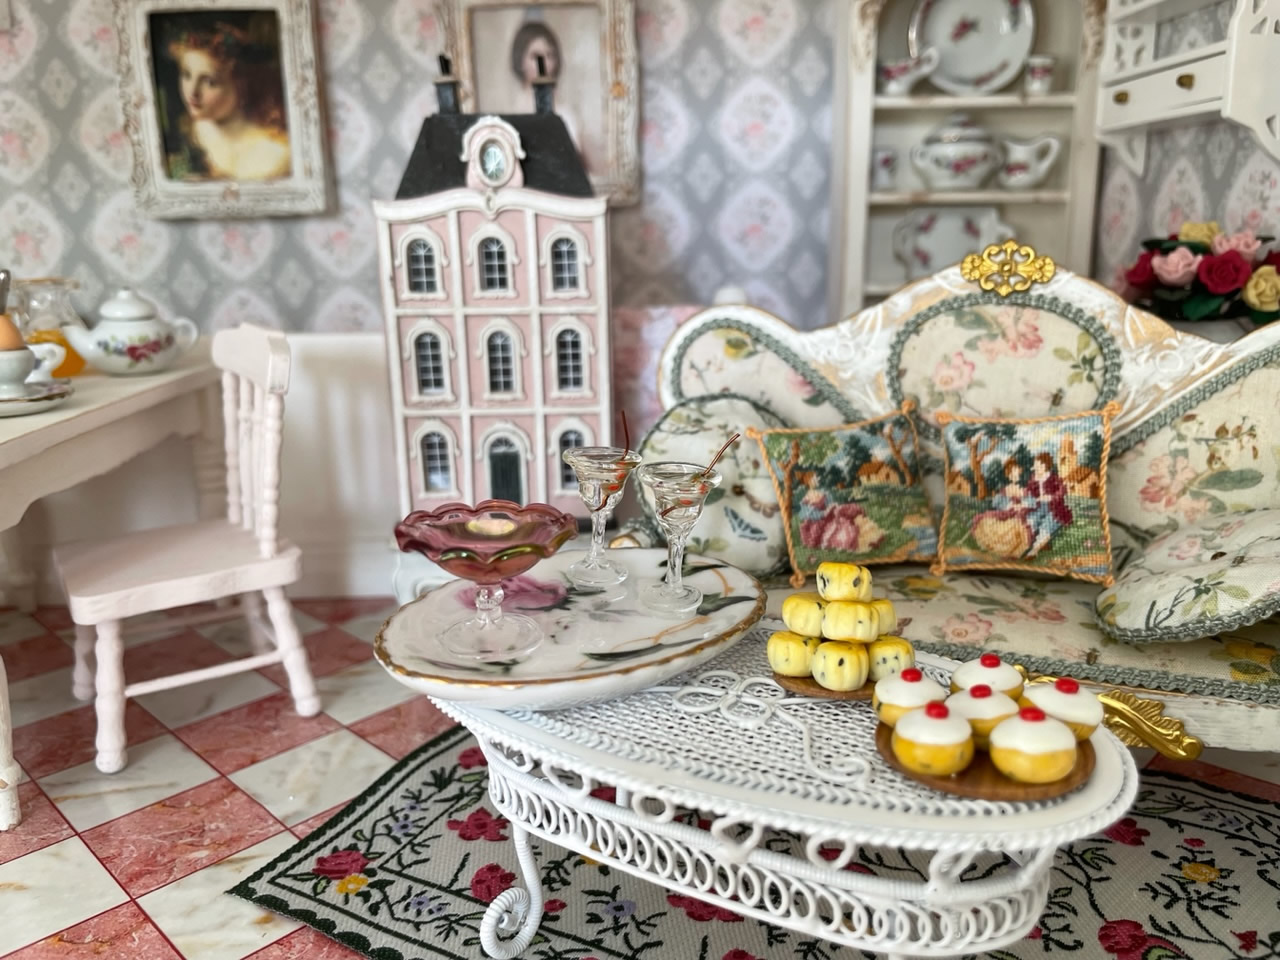 Doll's House room with cream buns and scons